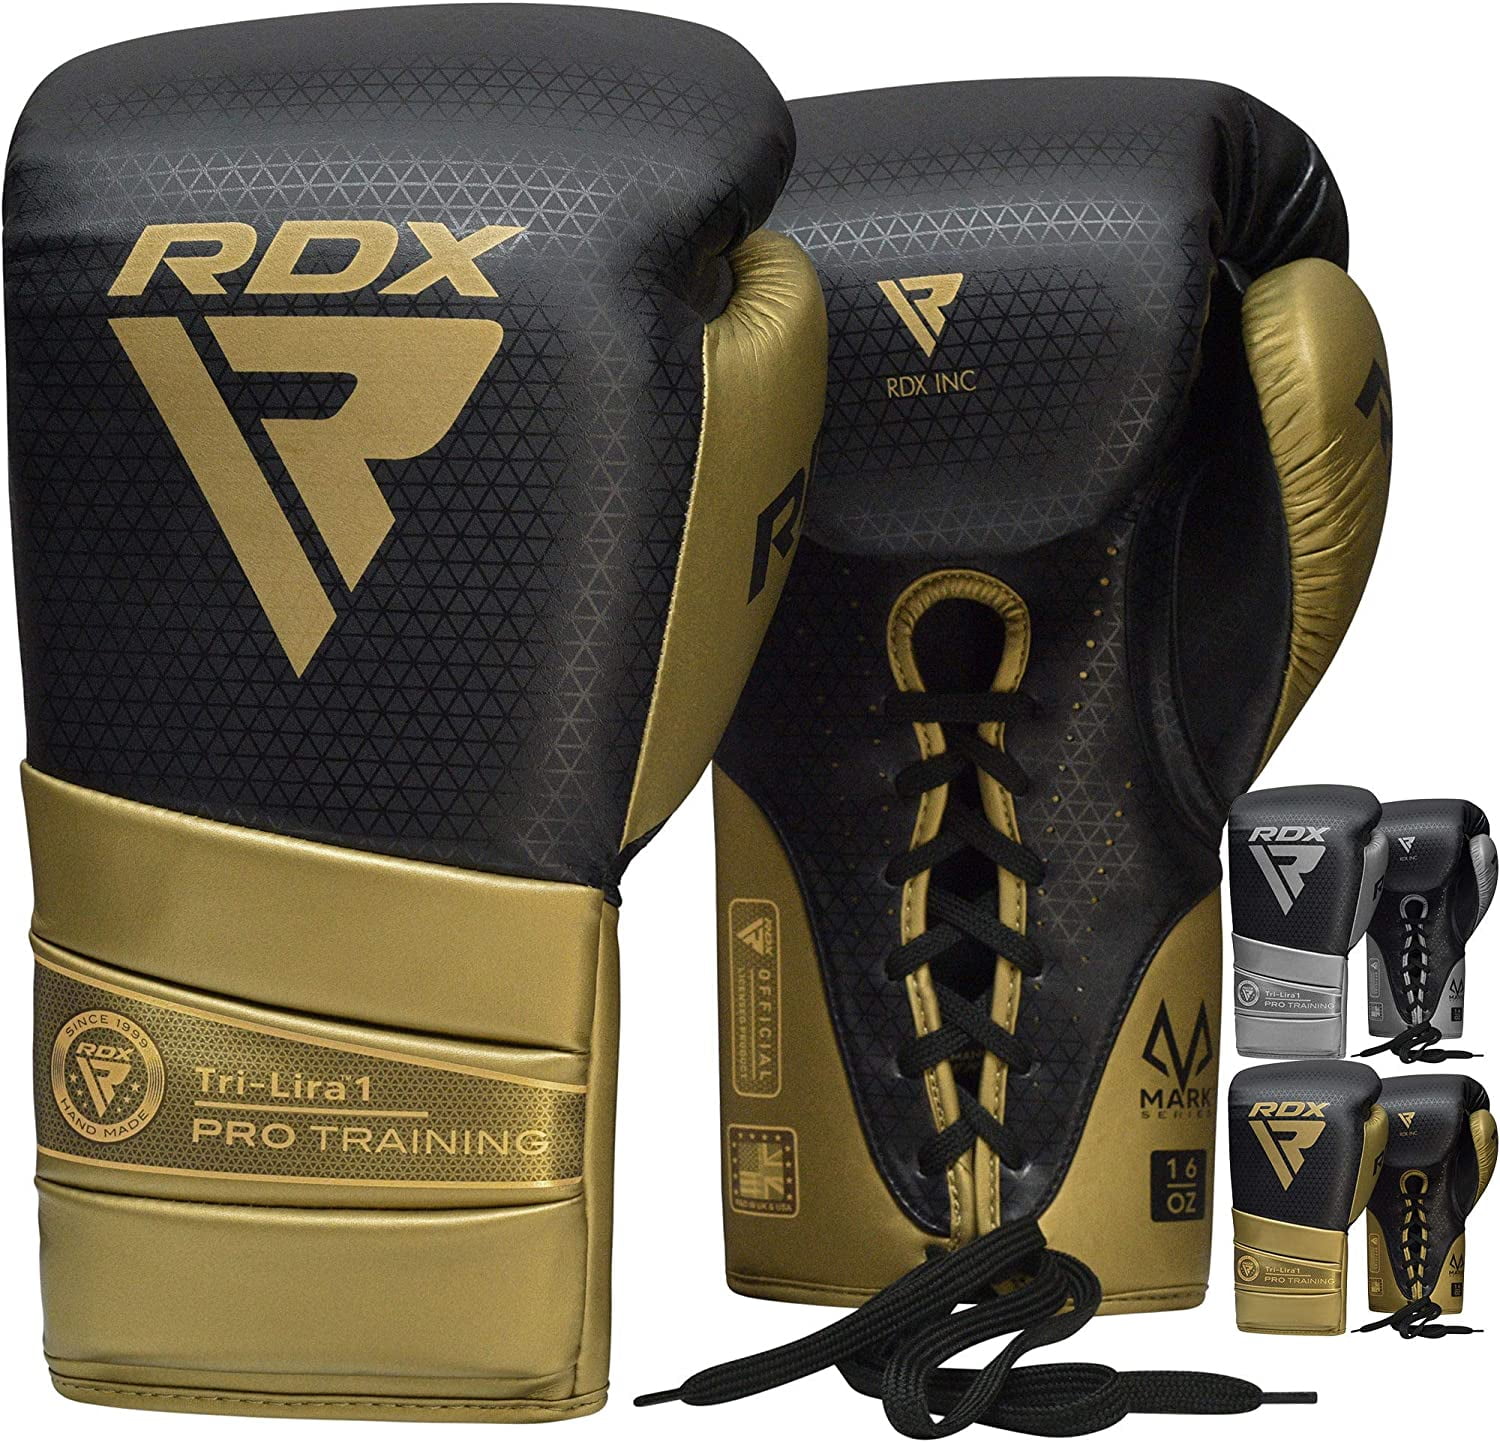 ARD Focus Pads Boxing Training Mitts MMA Strike Punching Bag Kick Curved Mitts 